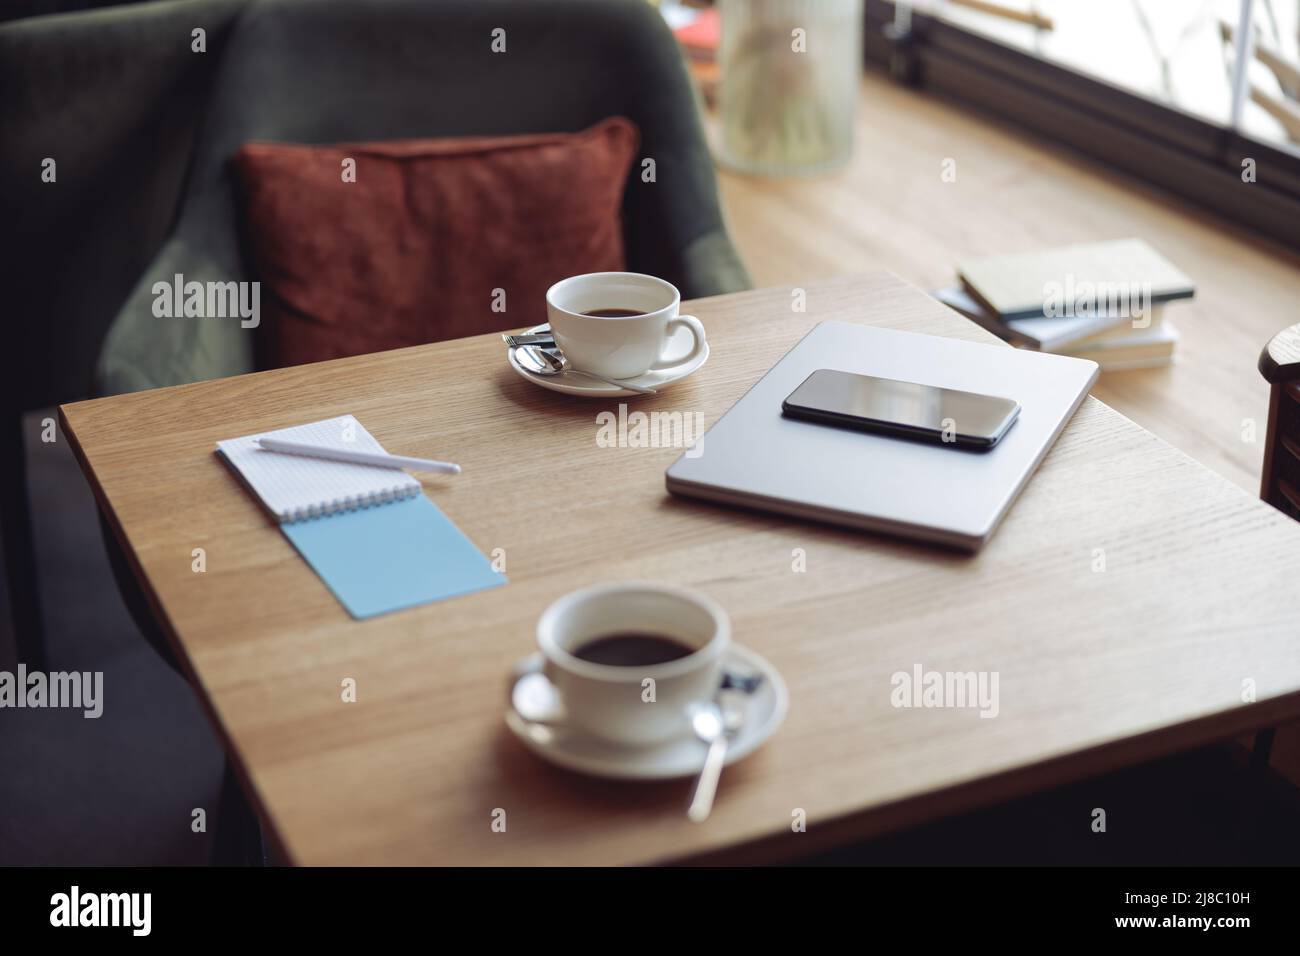 Wooden table with two white cups of coffee and business stuff. Laptop, notebook and phone. Stock Photo